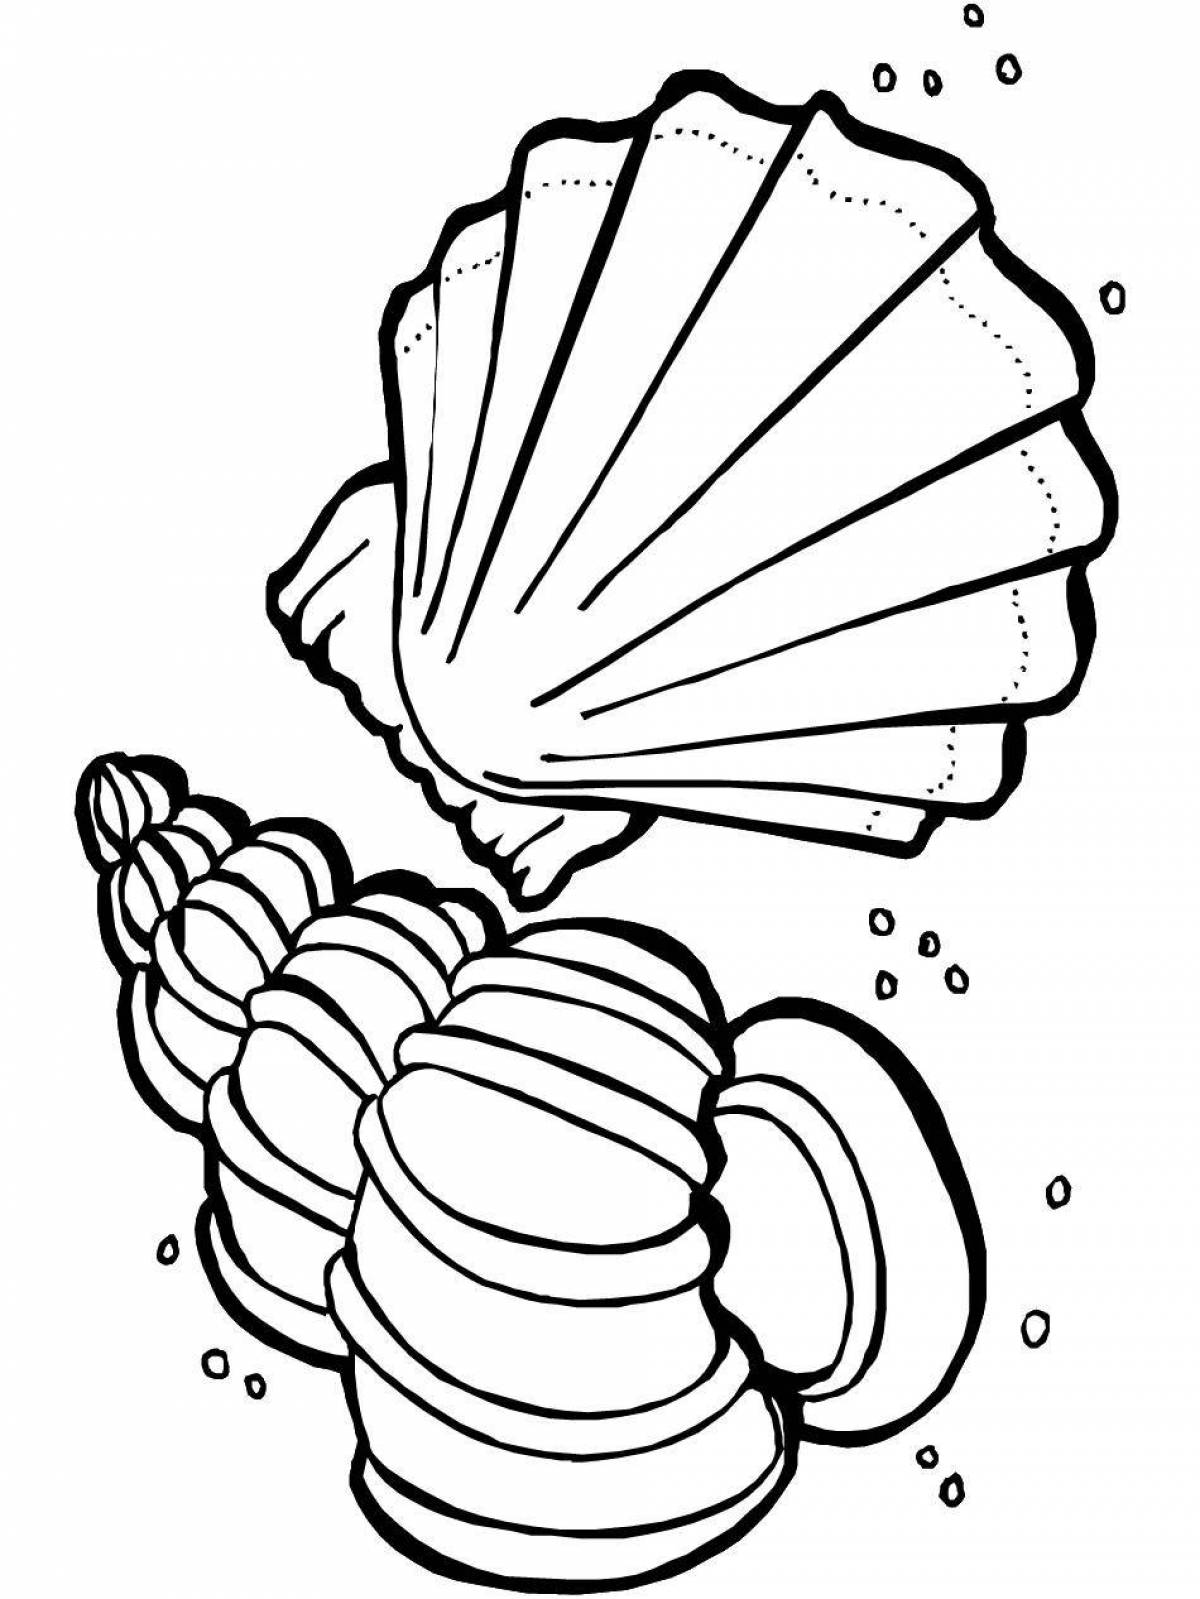 Fun gem coloring page for kids